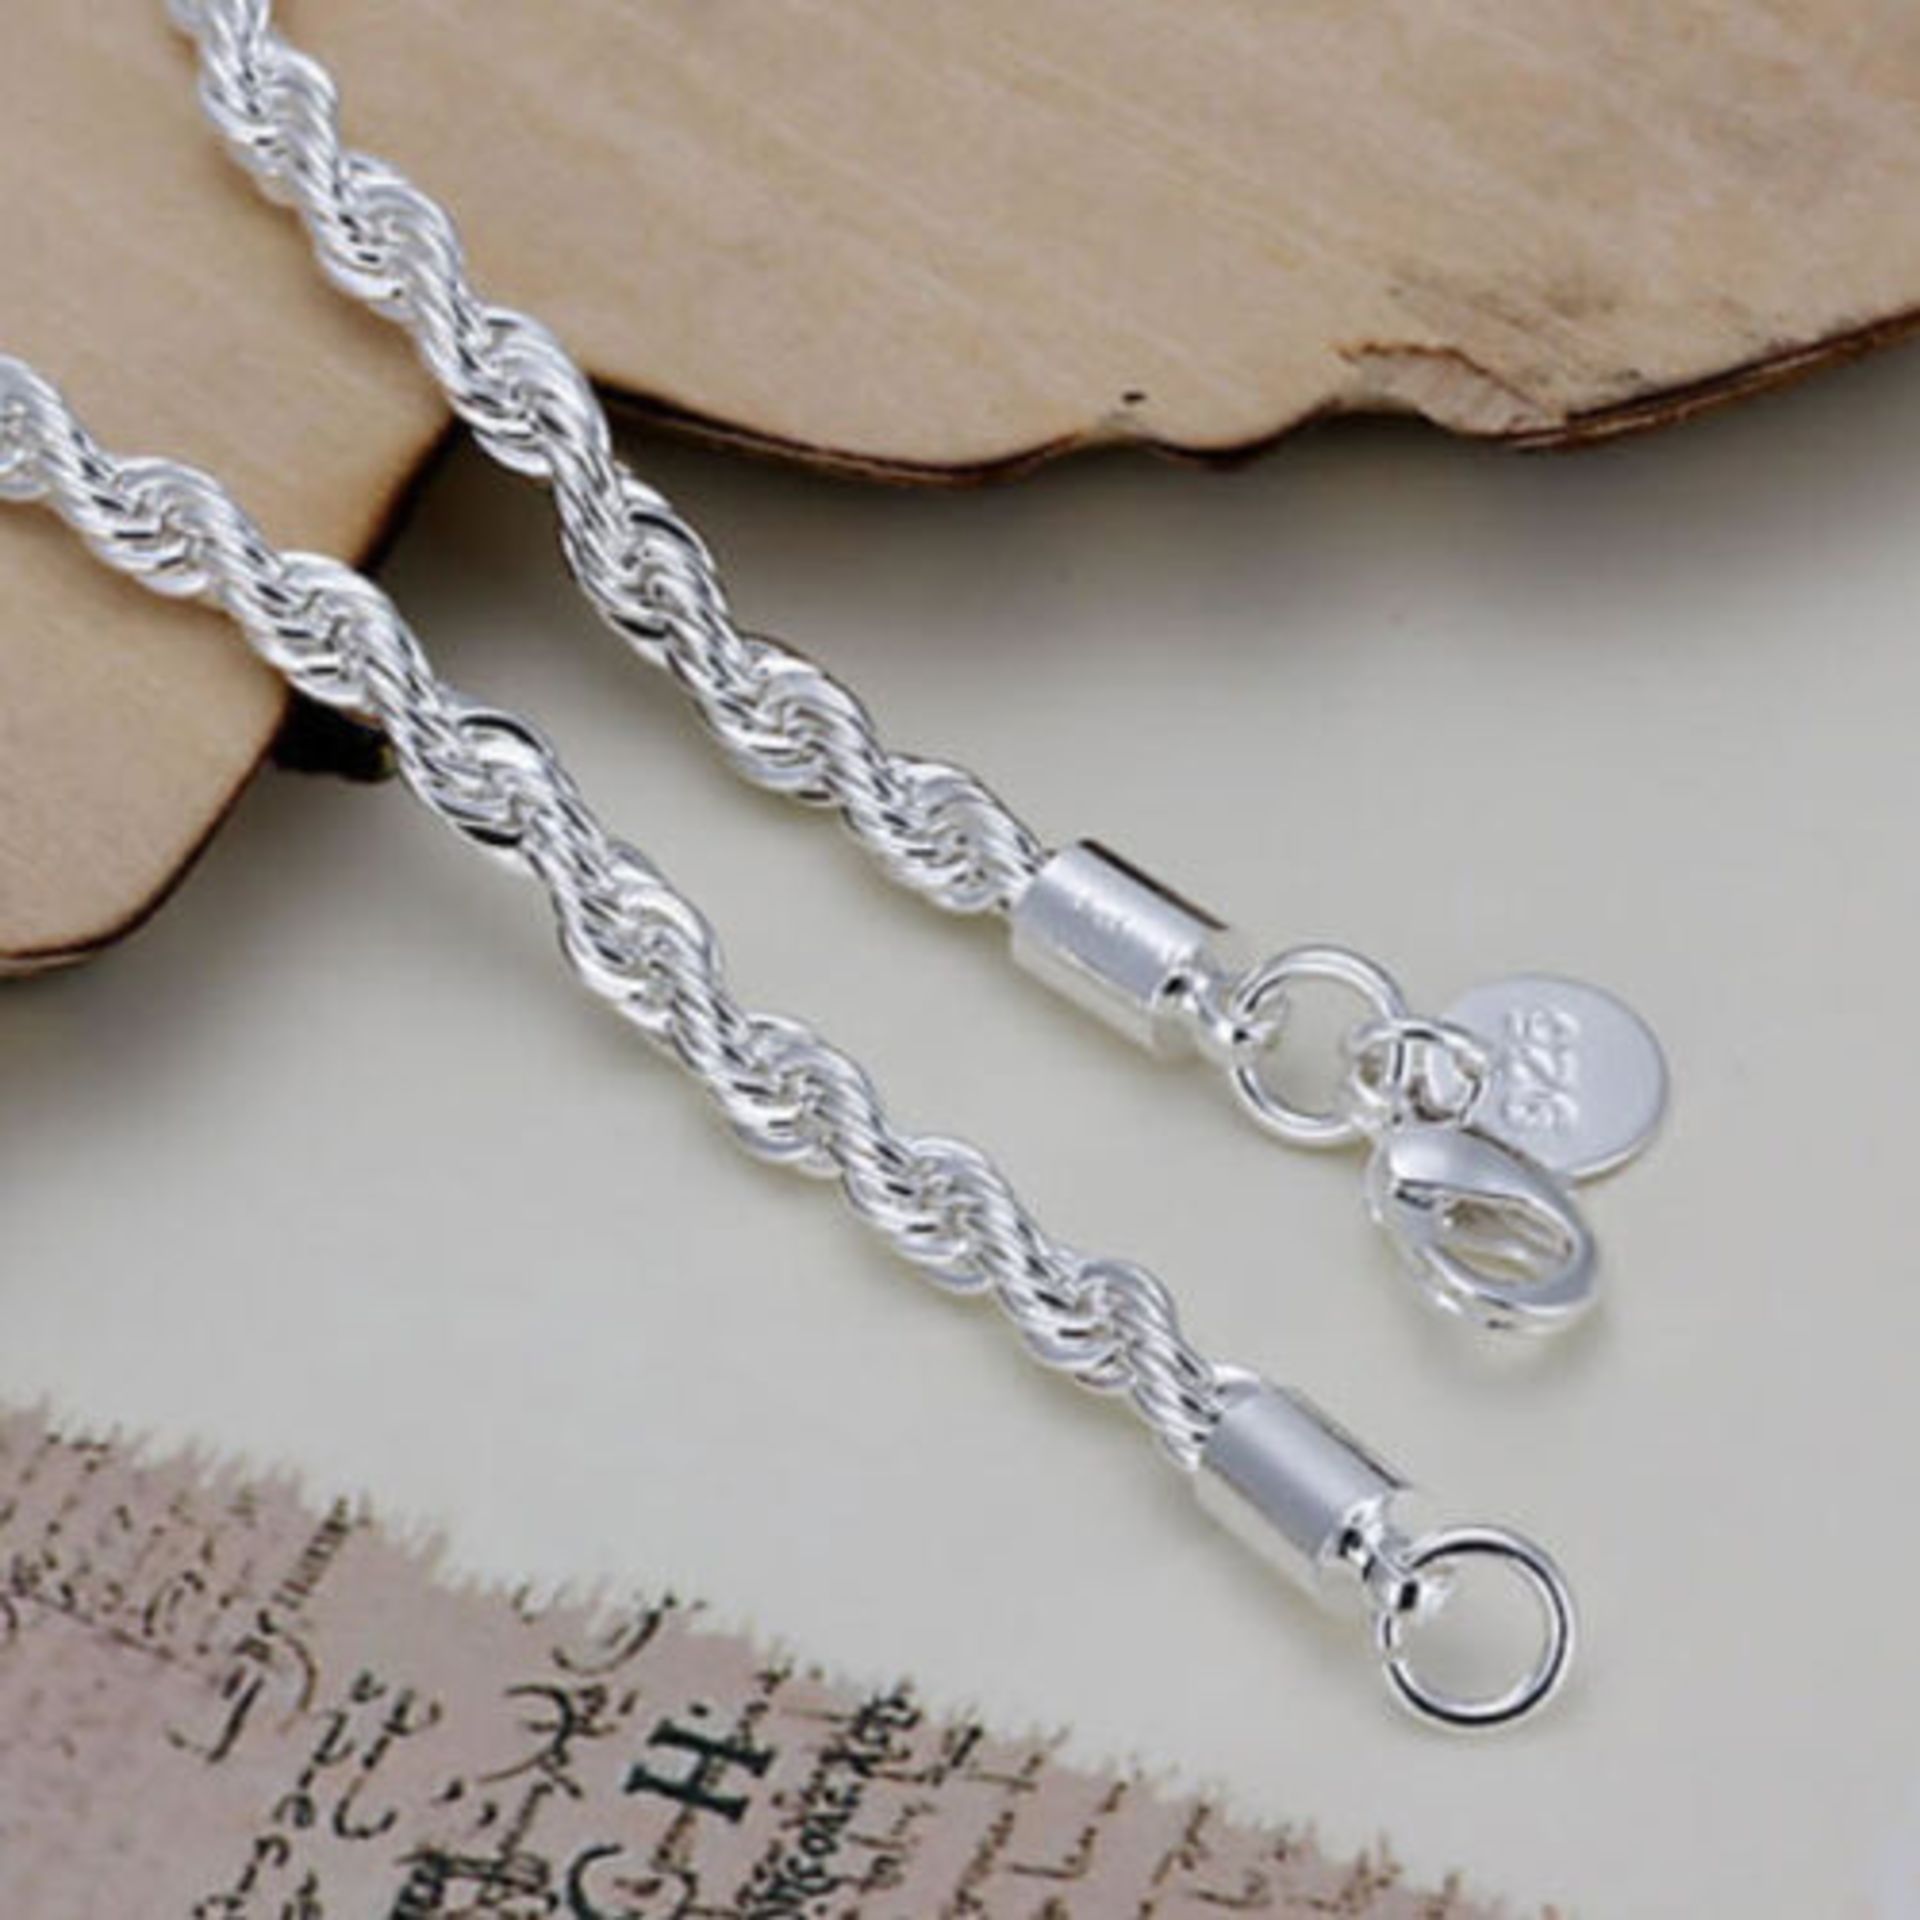 925 Sterling Silver Twisted Rope Bracelet 3mm Thick Chain Link *NO VAT* - Image 2 of 4